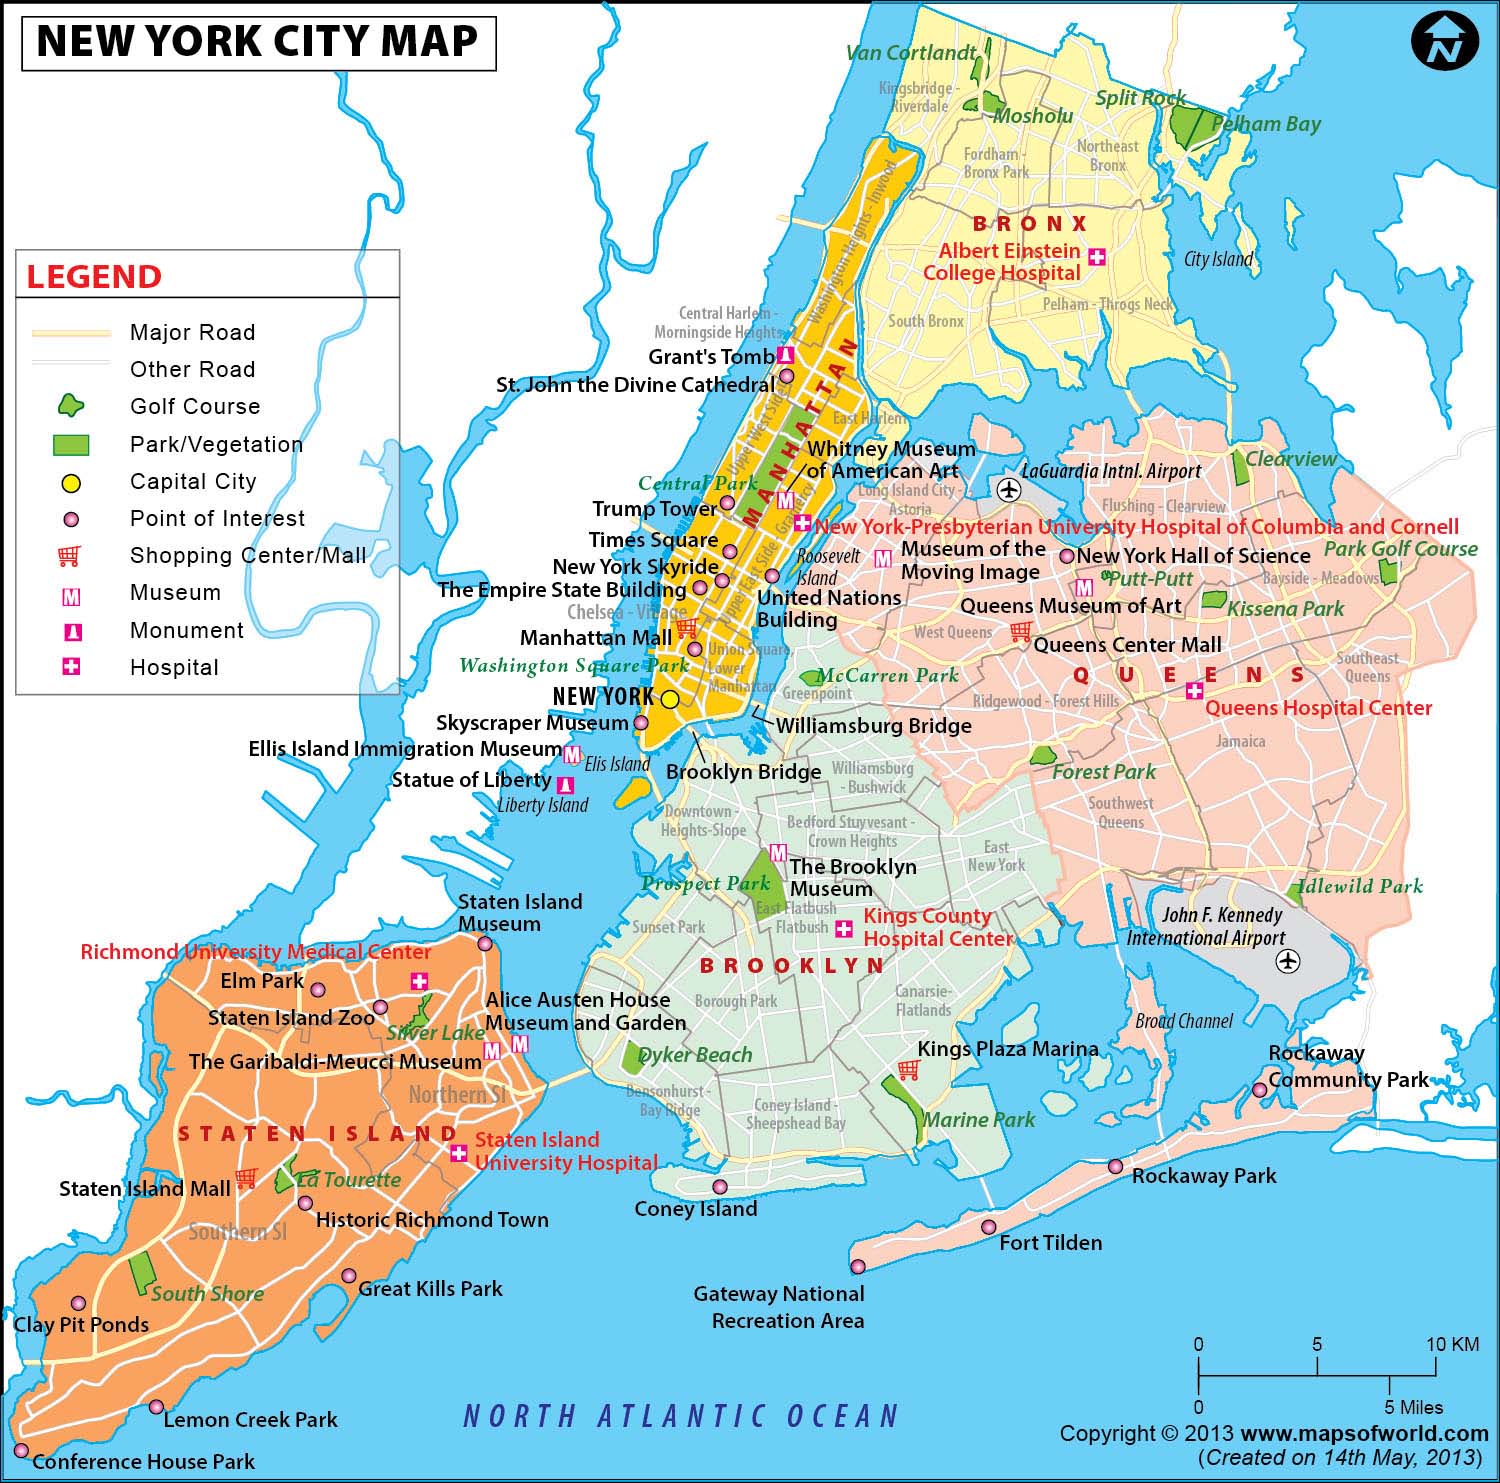 new york city on new york map Nyc Map Map Of New York City Information And Facts Of New York City new york city on new york map